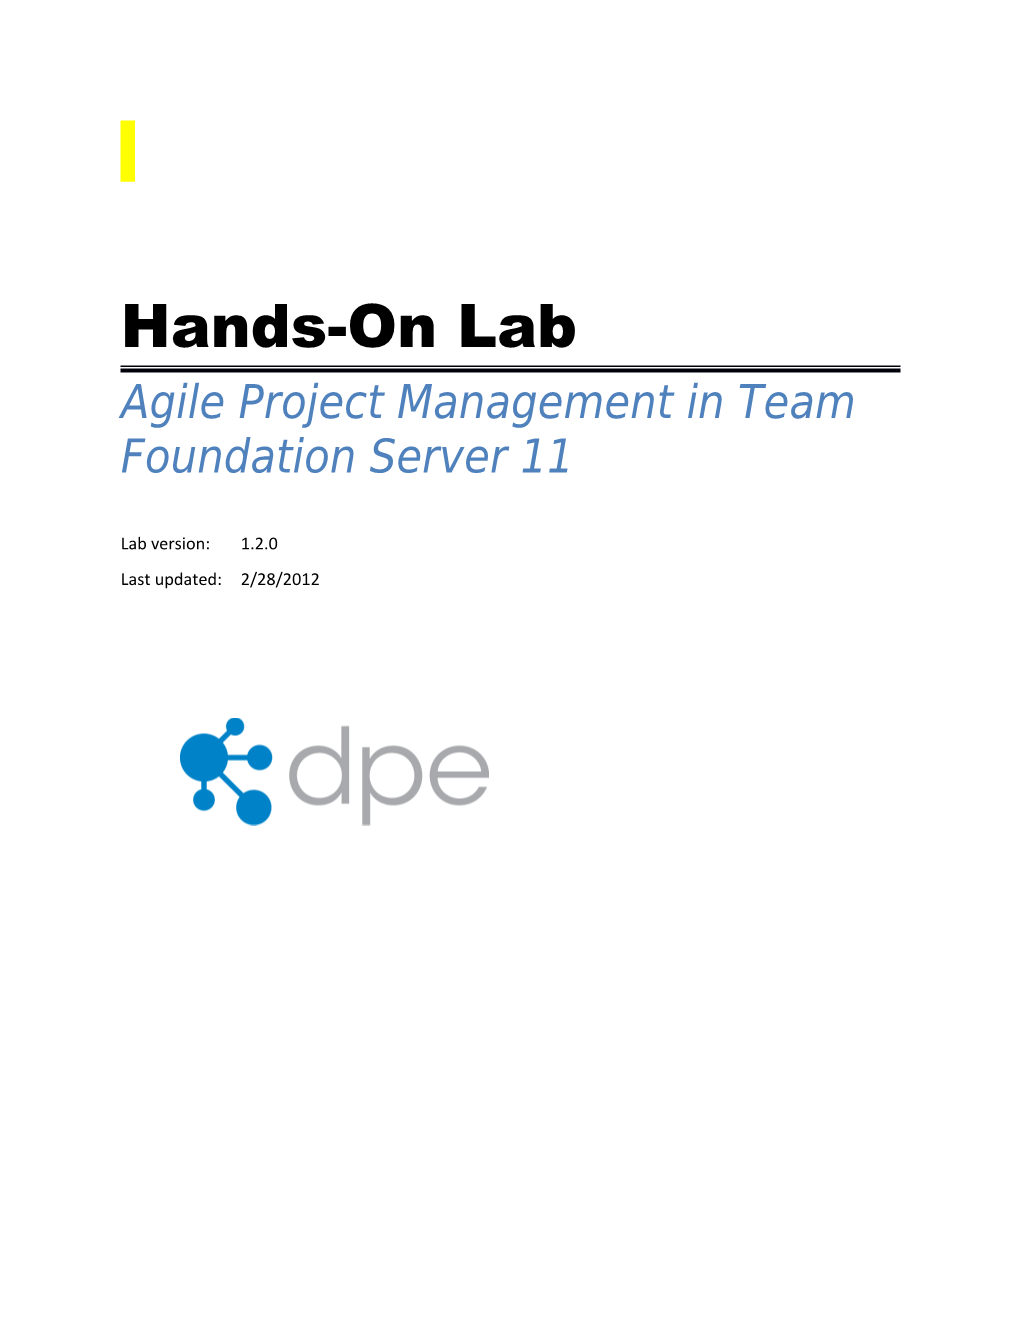 Agile Project Management in Team Foundation Server 11